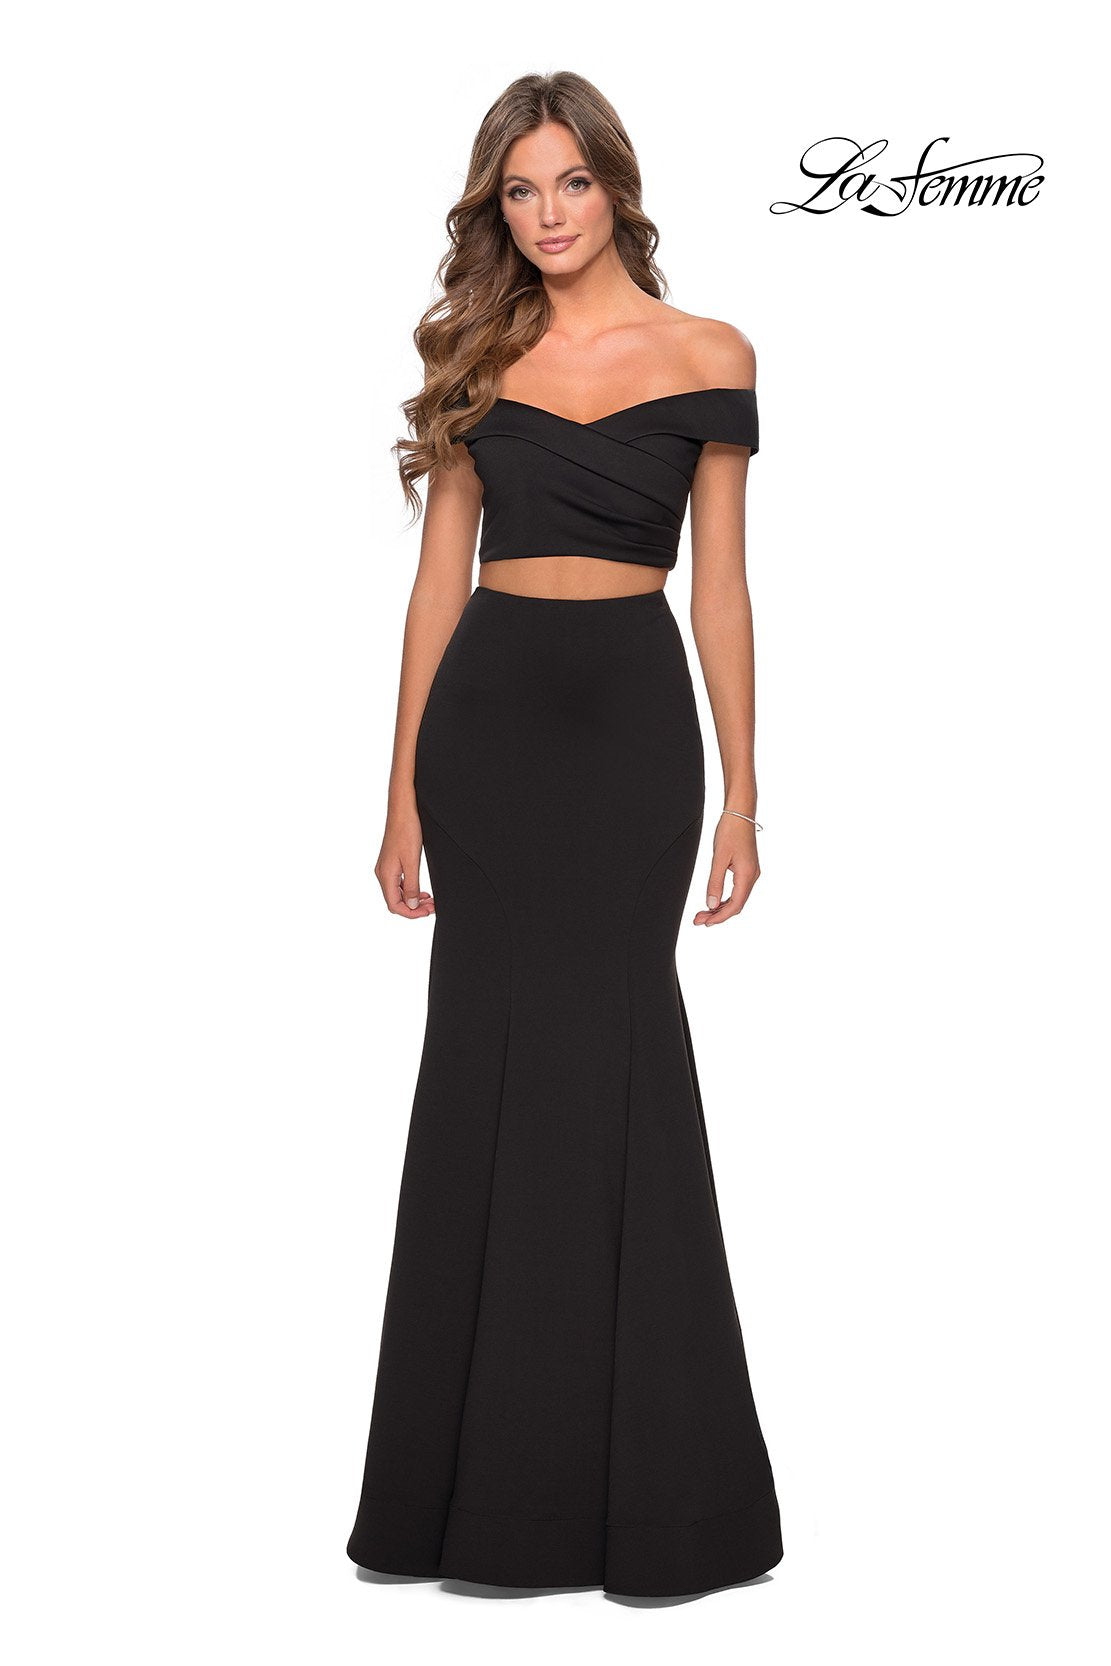 La Femme 28521 dress images in these colors: Black, Emerald, Navy.